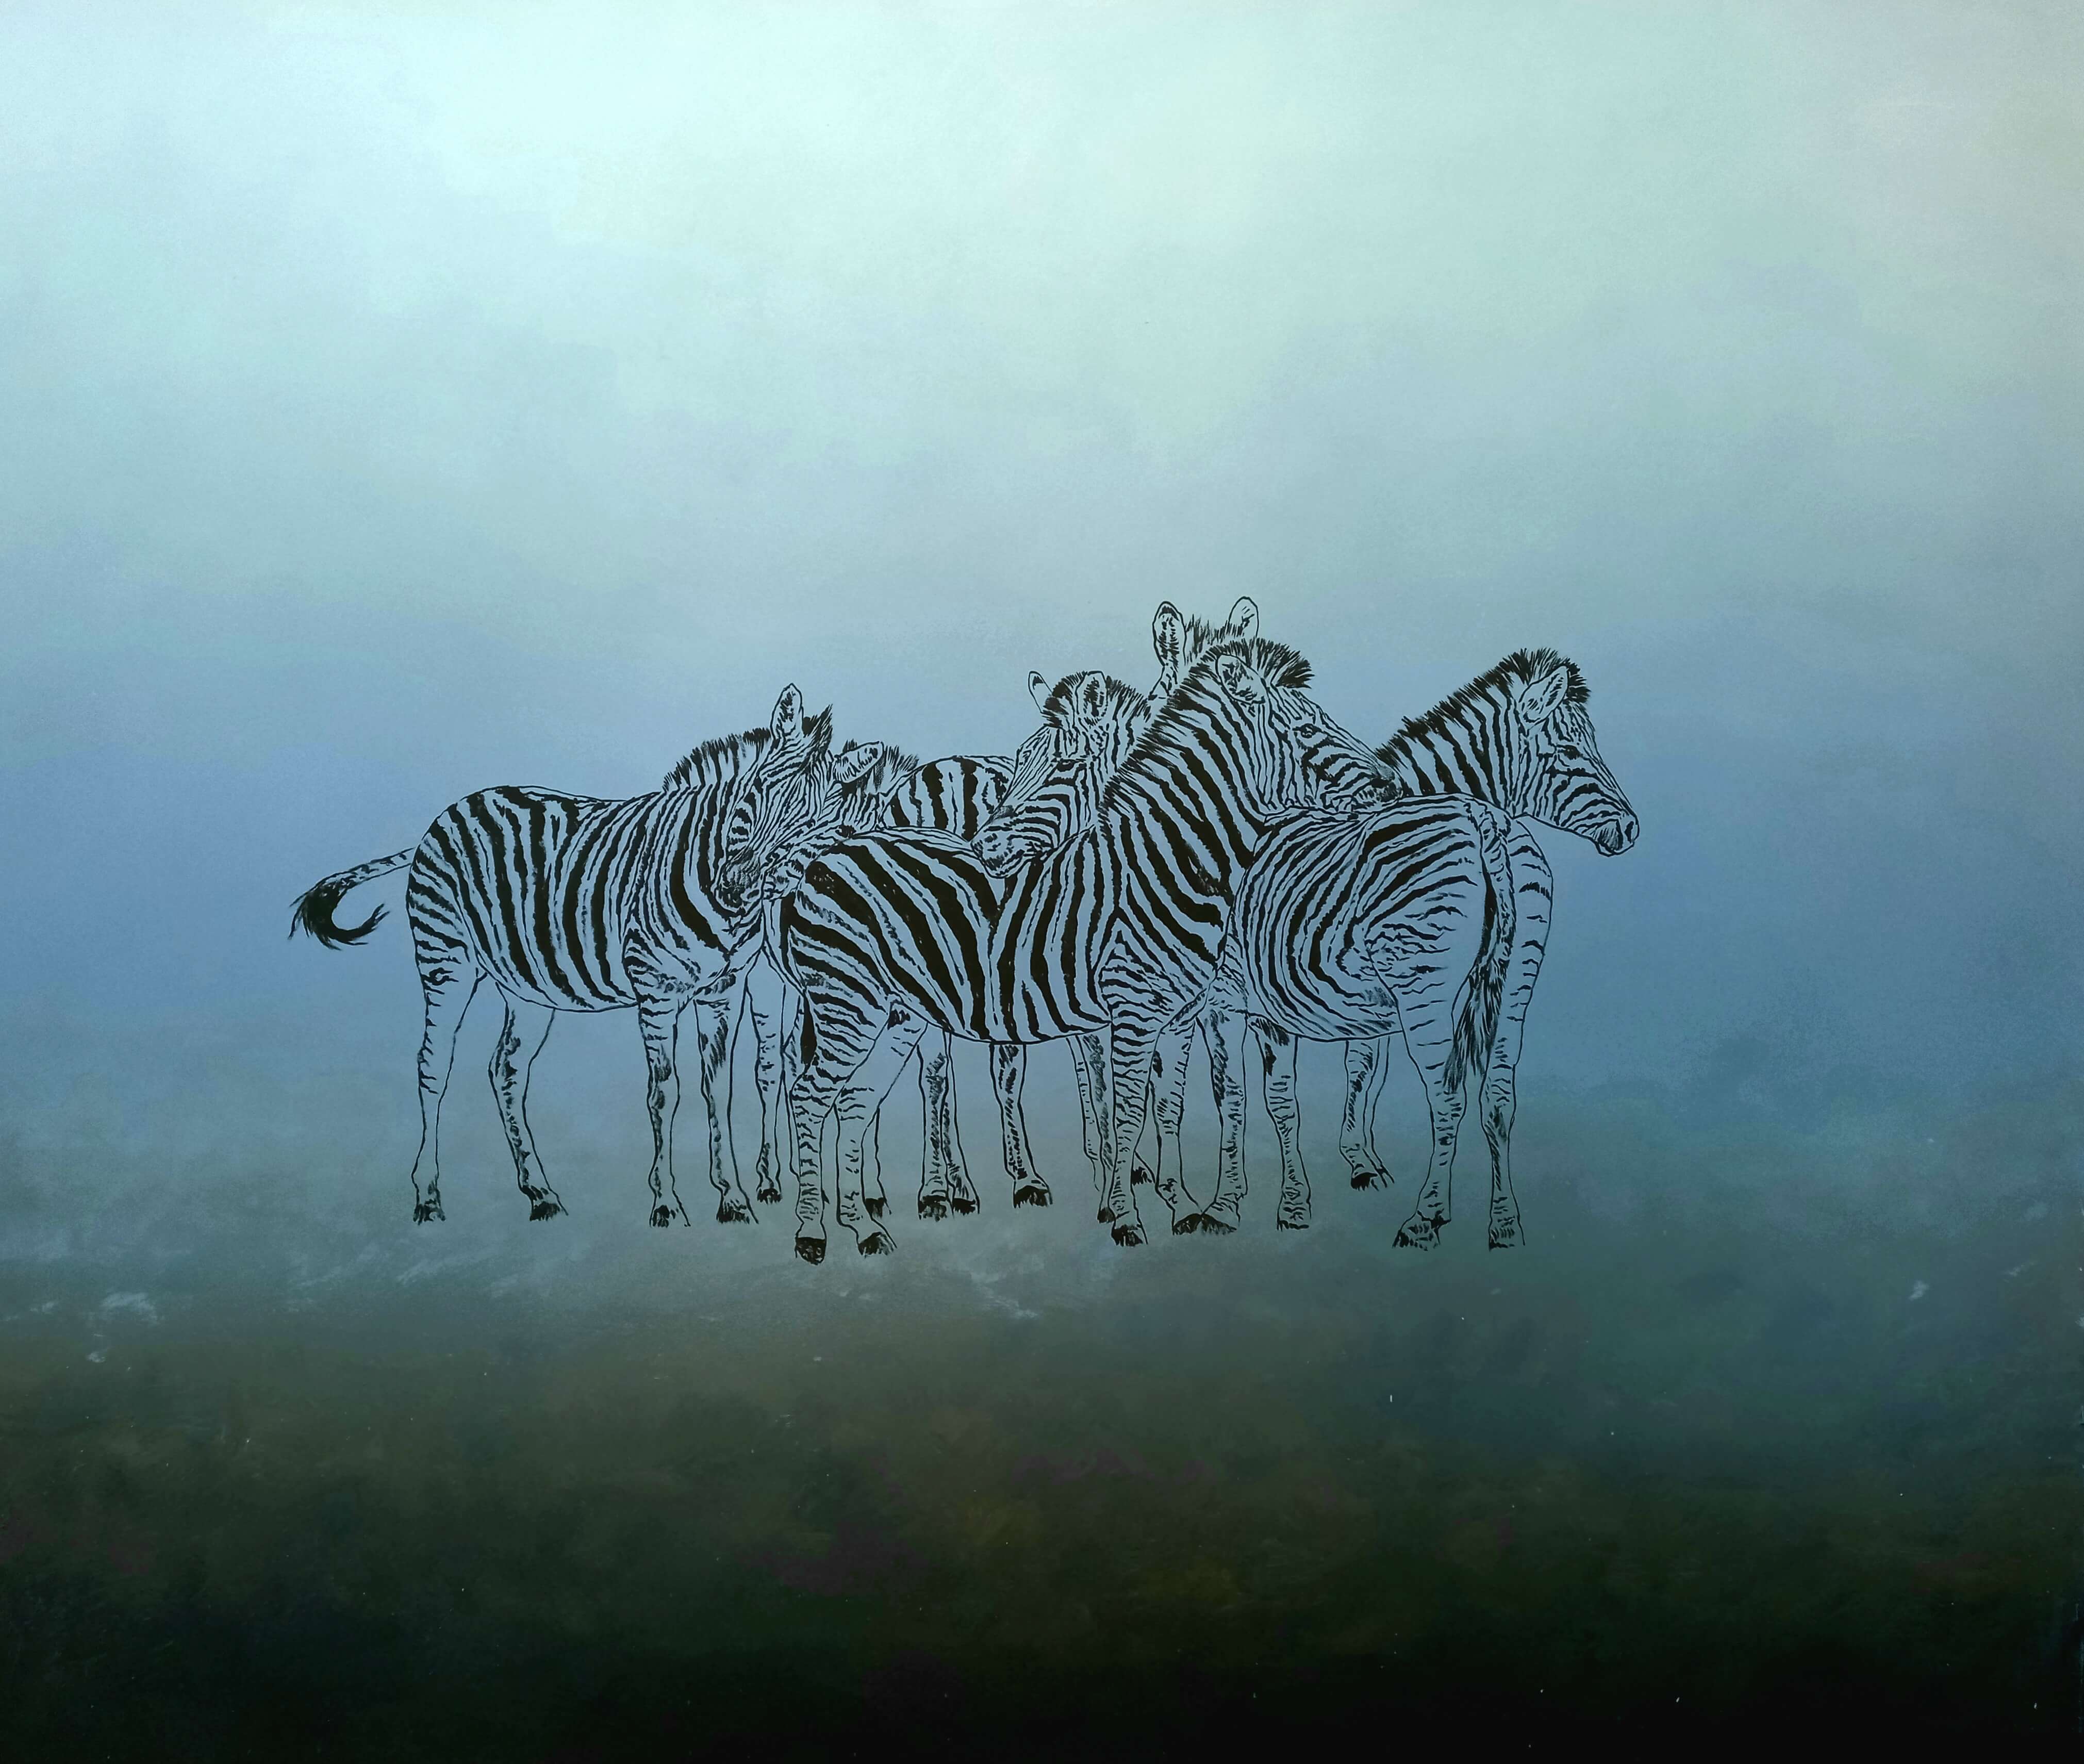 Zebras drawn in black on the background of his artwork.